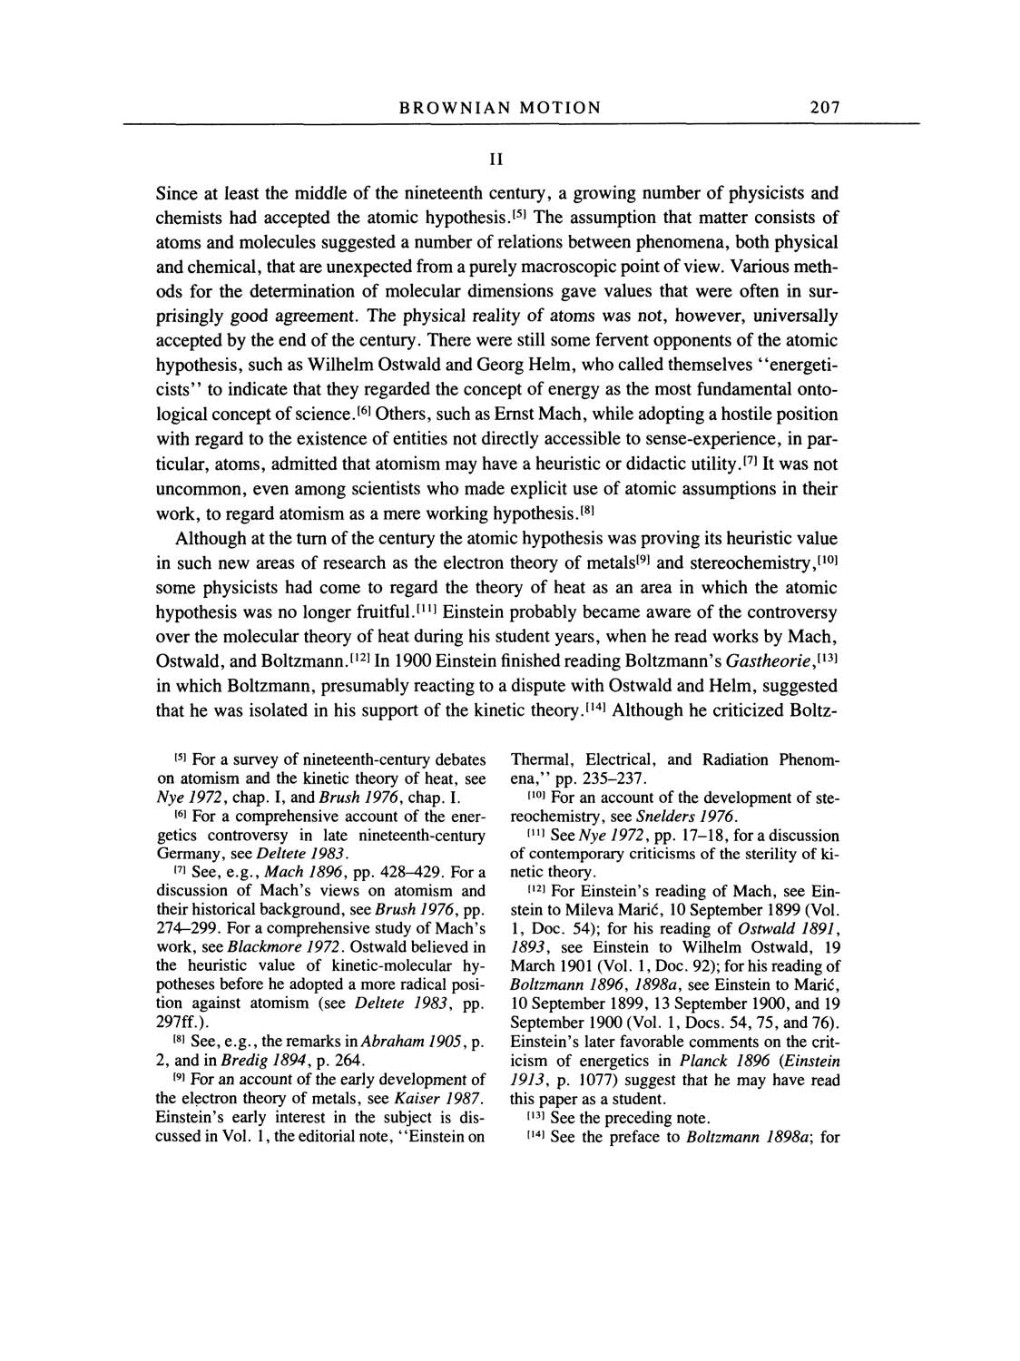 Volume 2: The Swiss Years: Writings, 1900-1909 page 207